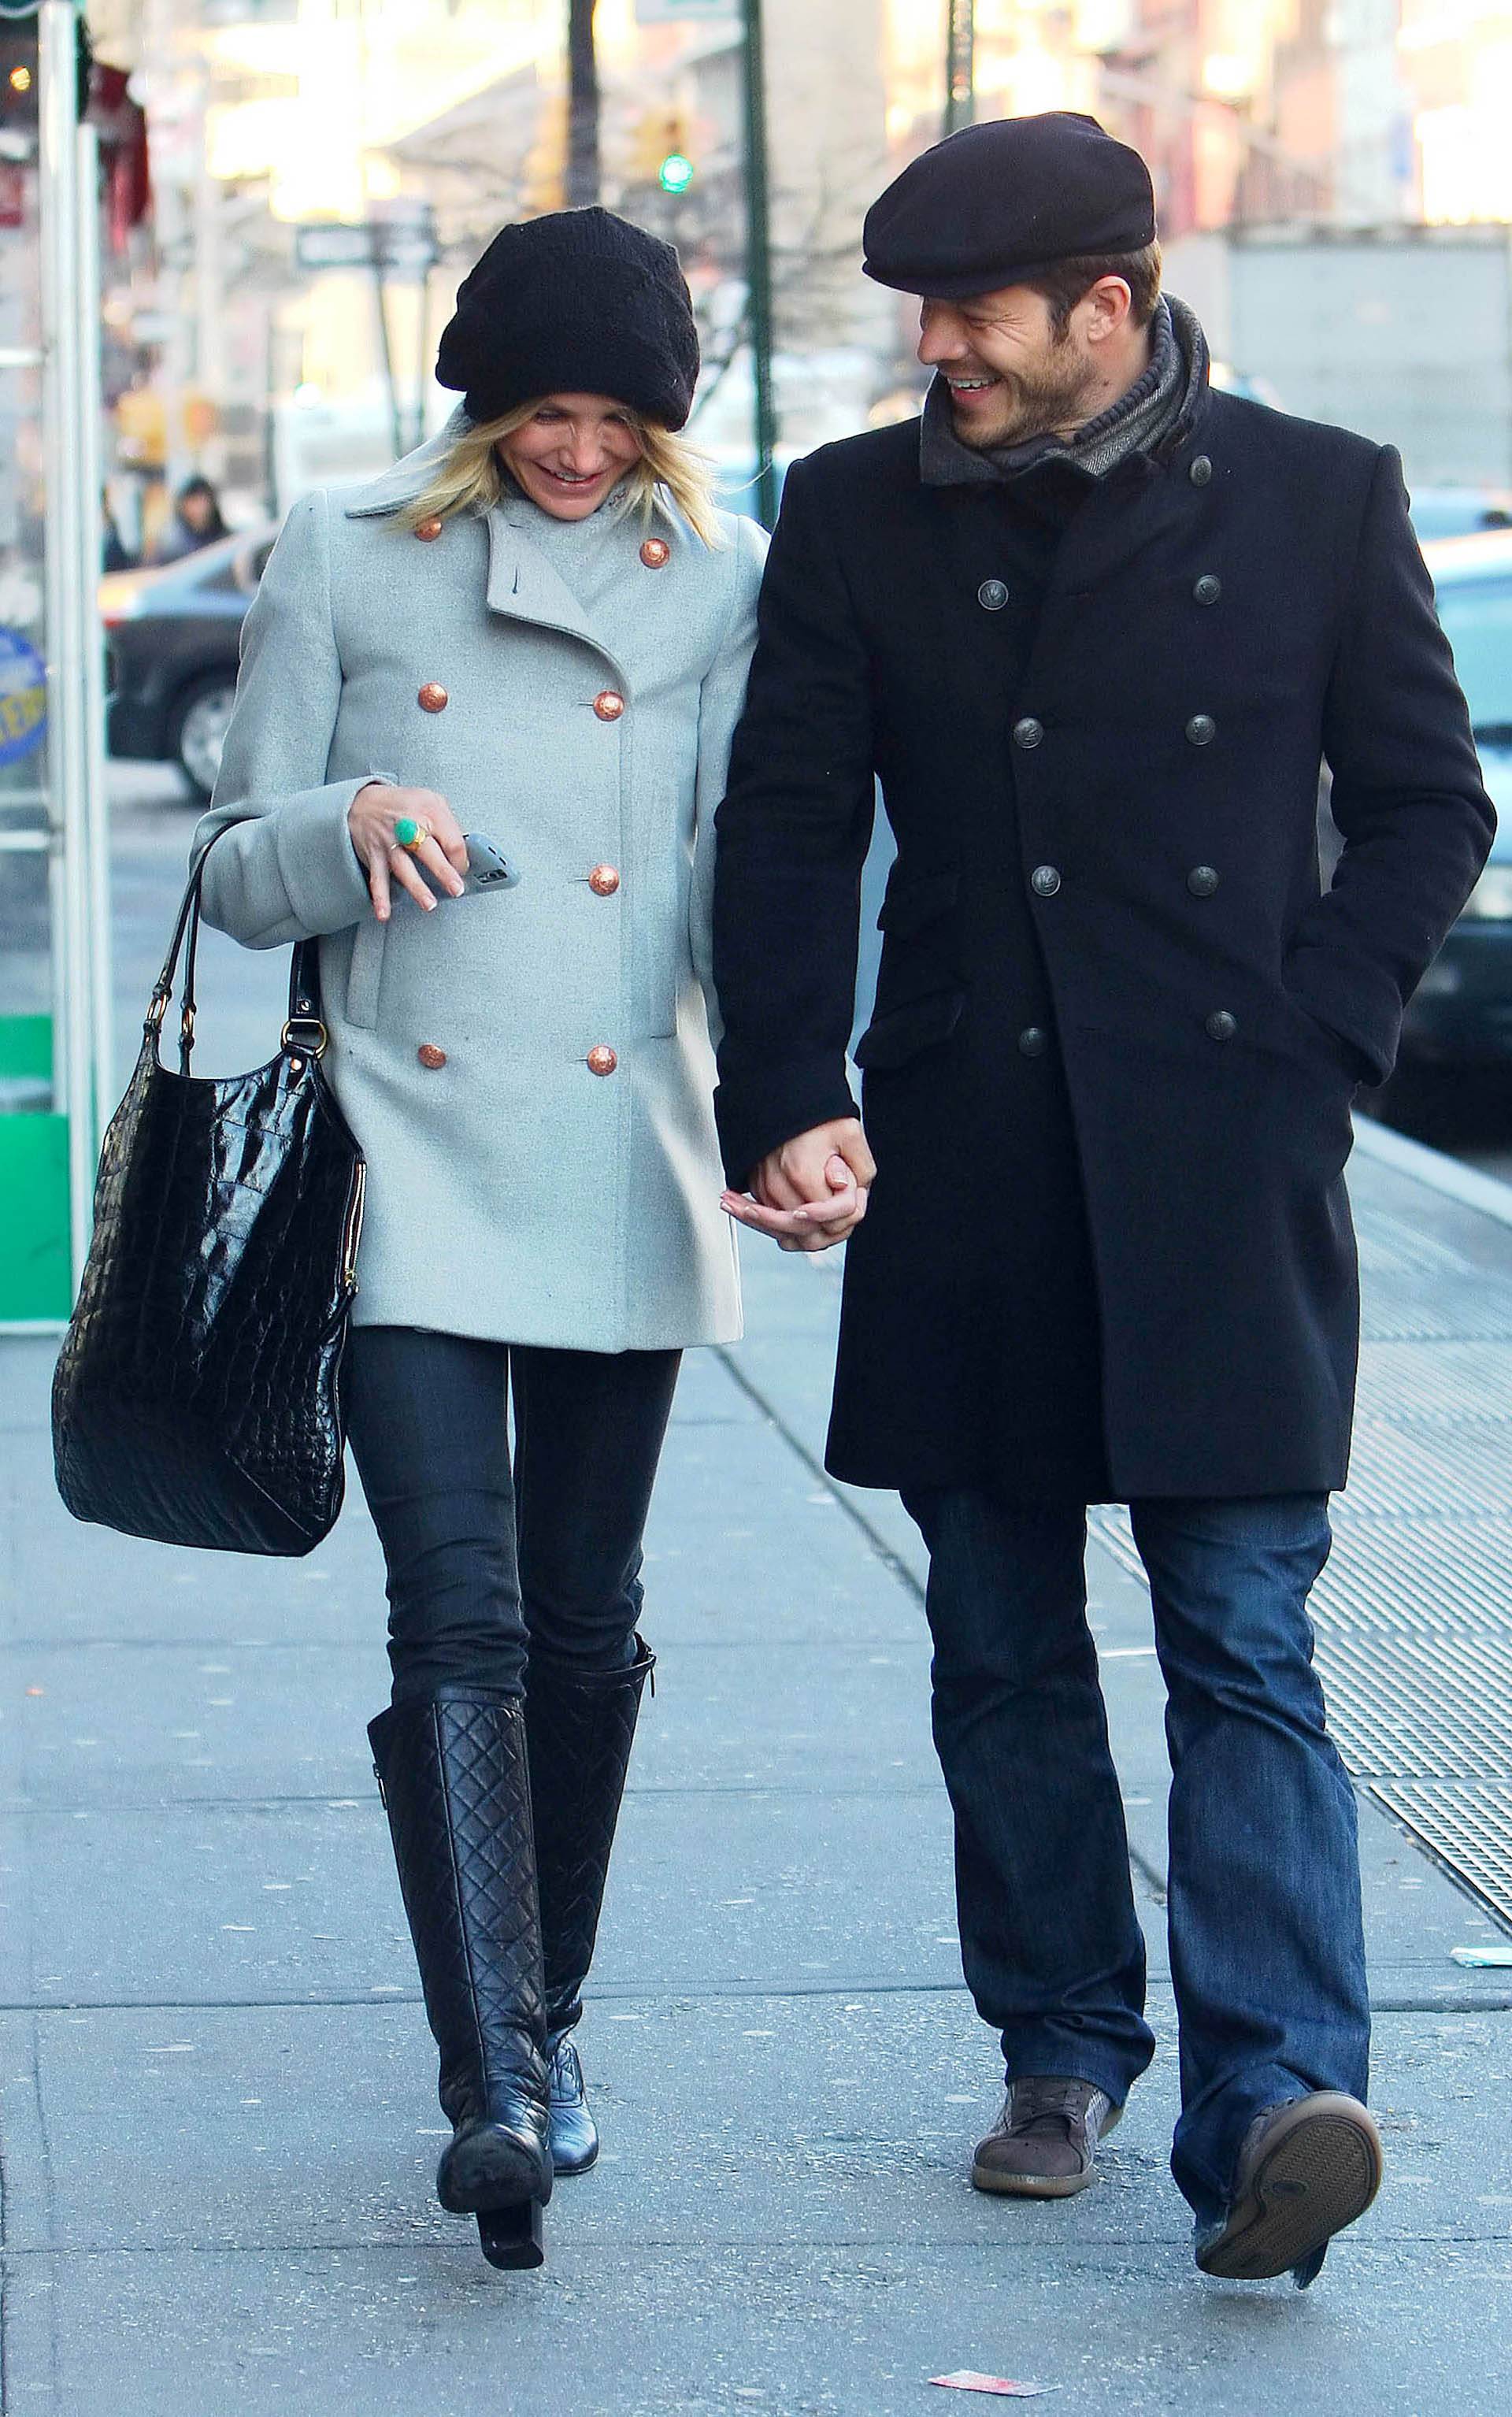 Cameron Diaz and Paul Sculfor Sighting - New York